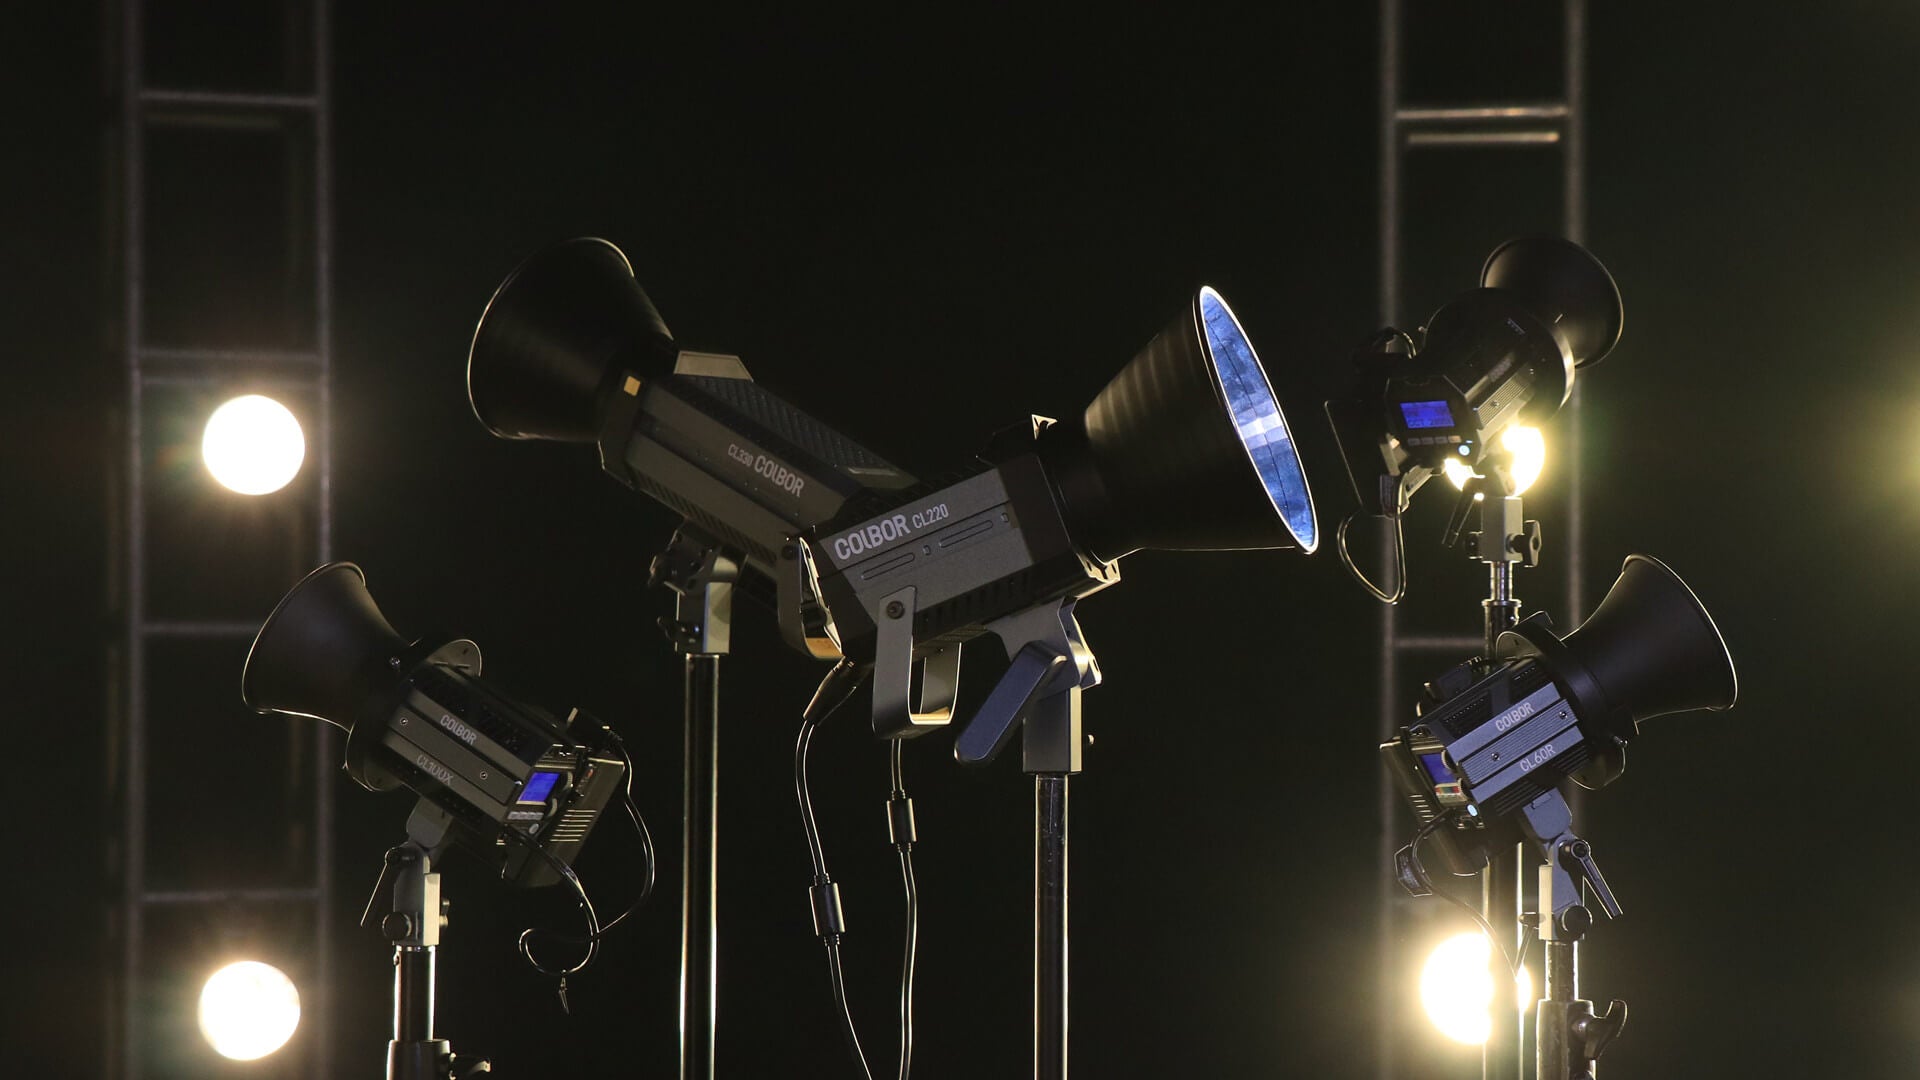 Buyer guide to lights for video studio